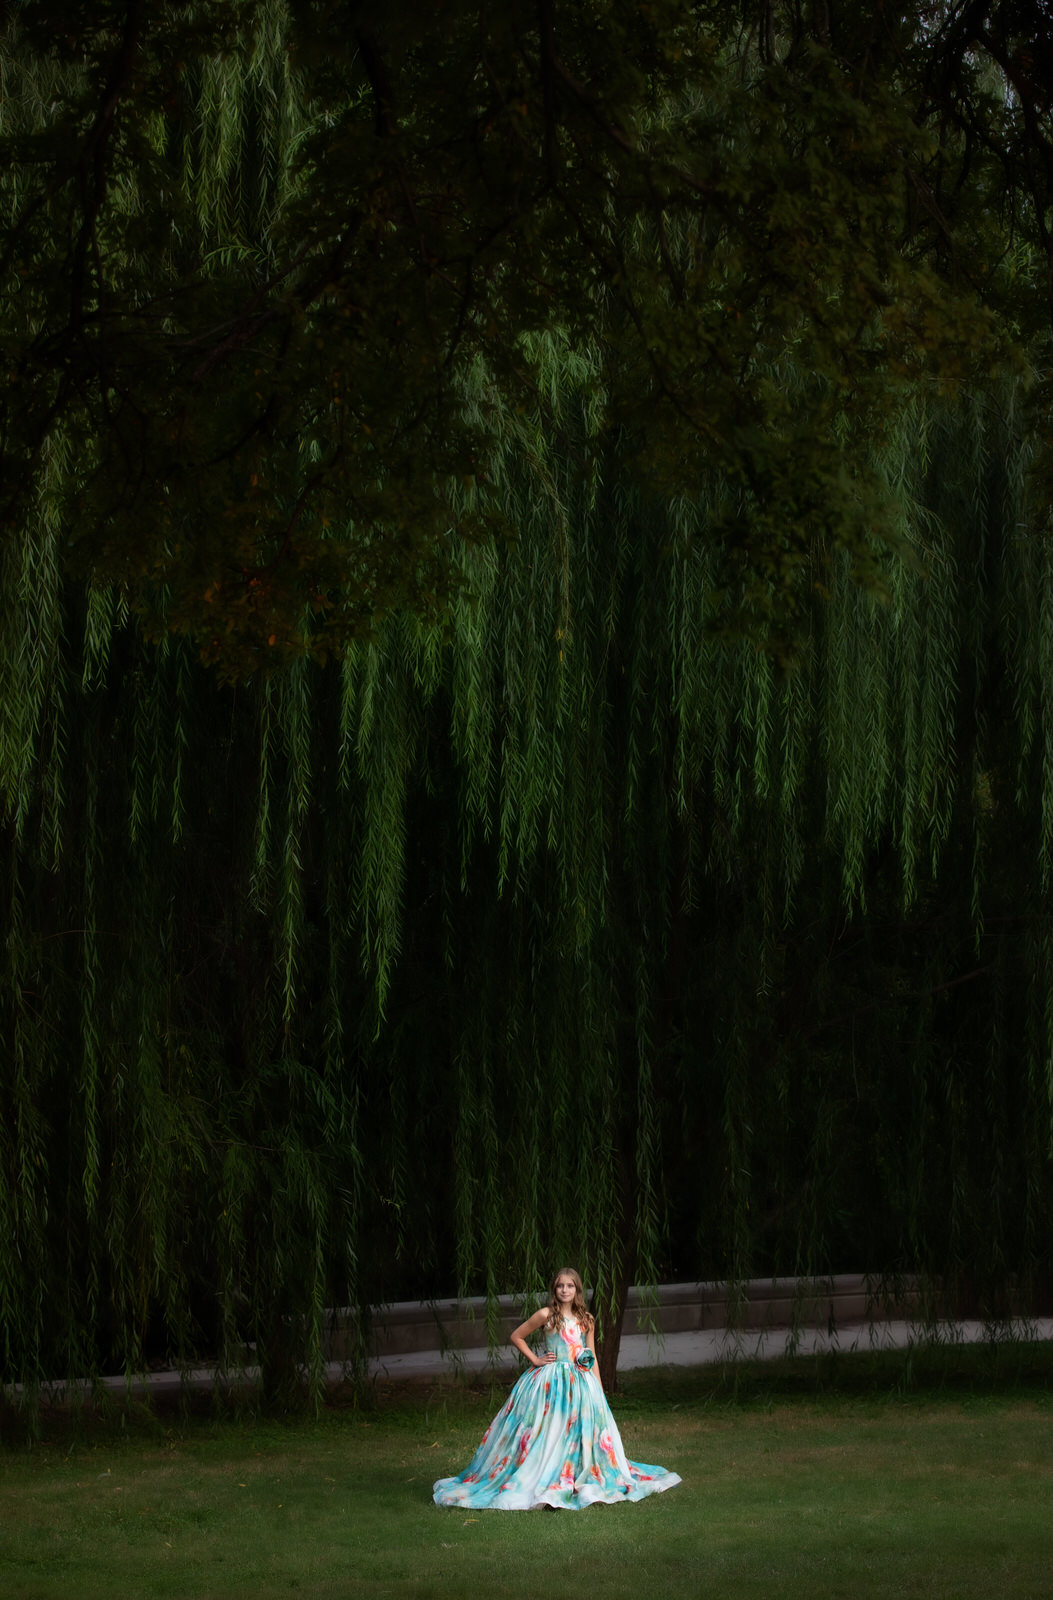 A young girl stands in a park under a large willow tree in a large blue dress fort worth pediatricians